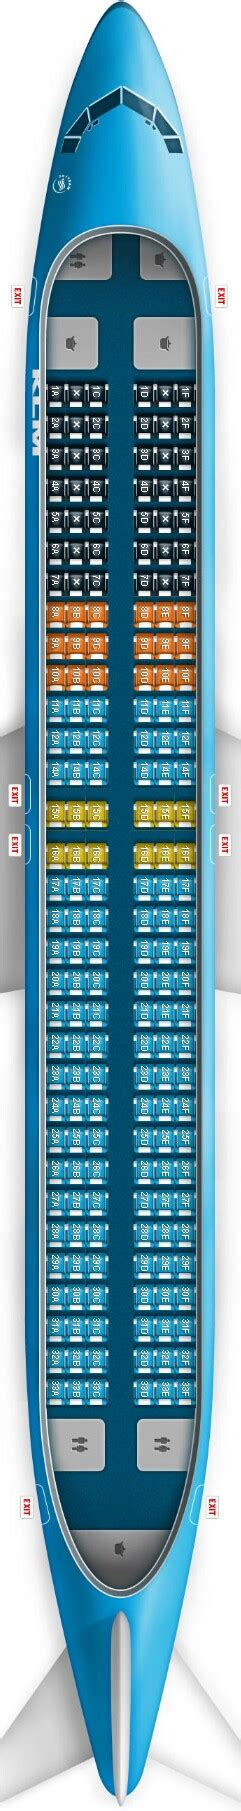 Klm Seat Map With Images Klm Airlines Airline Seats Free